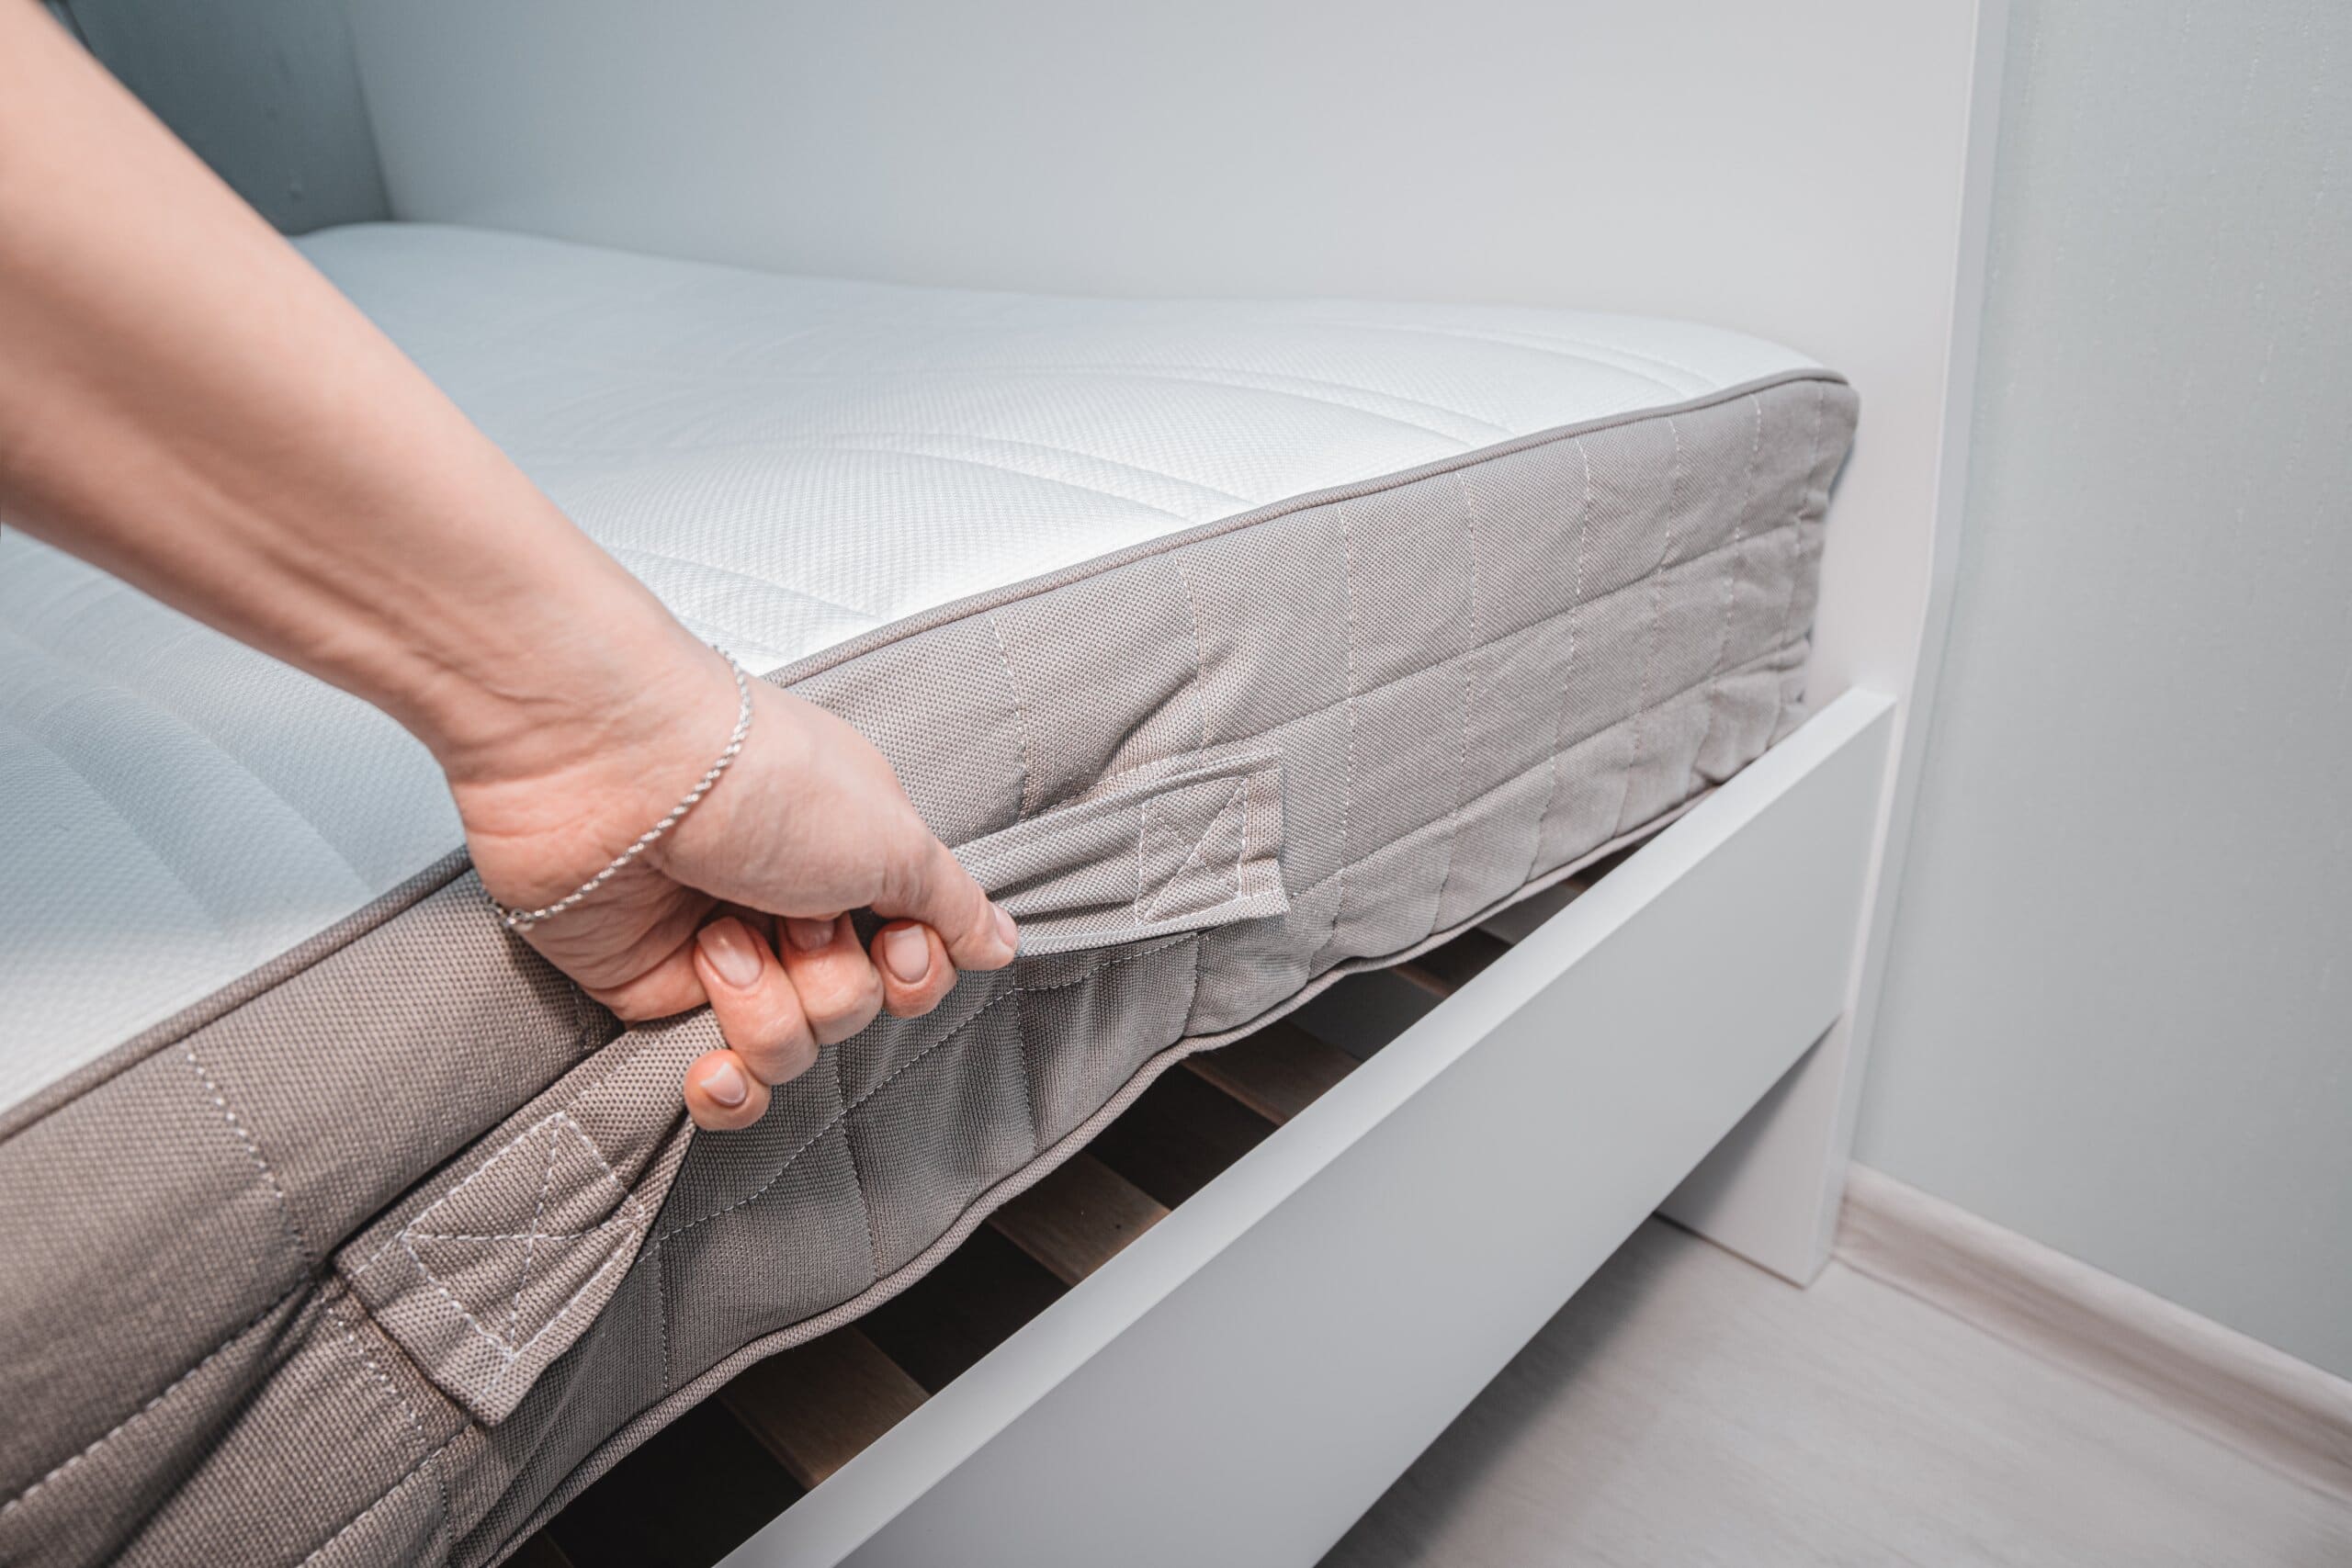 Hands lifting a mattress by the turning handles.